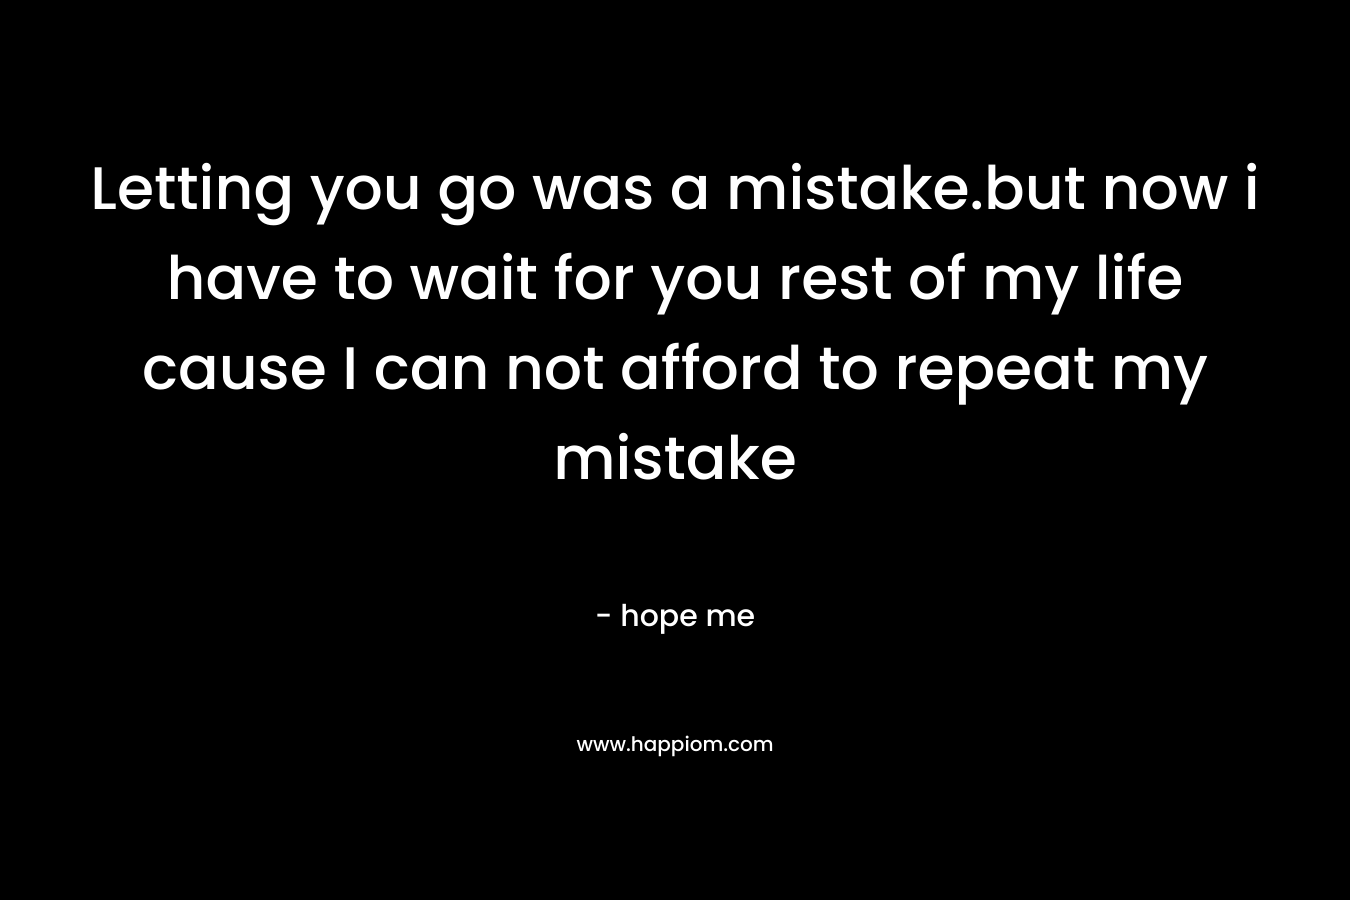 Letting you go was a mistake.but now i have to wait for you rest of my life cause I can not afford to repeat my mistake – hope me